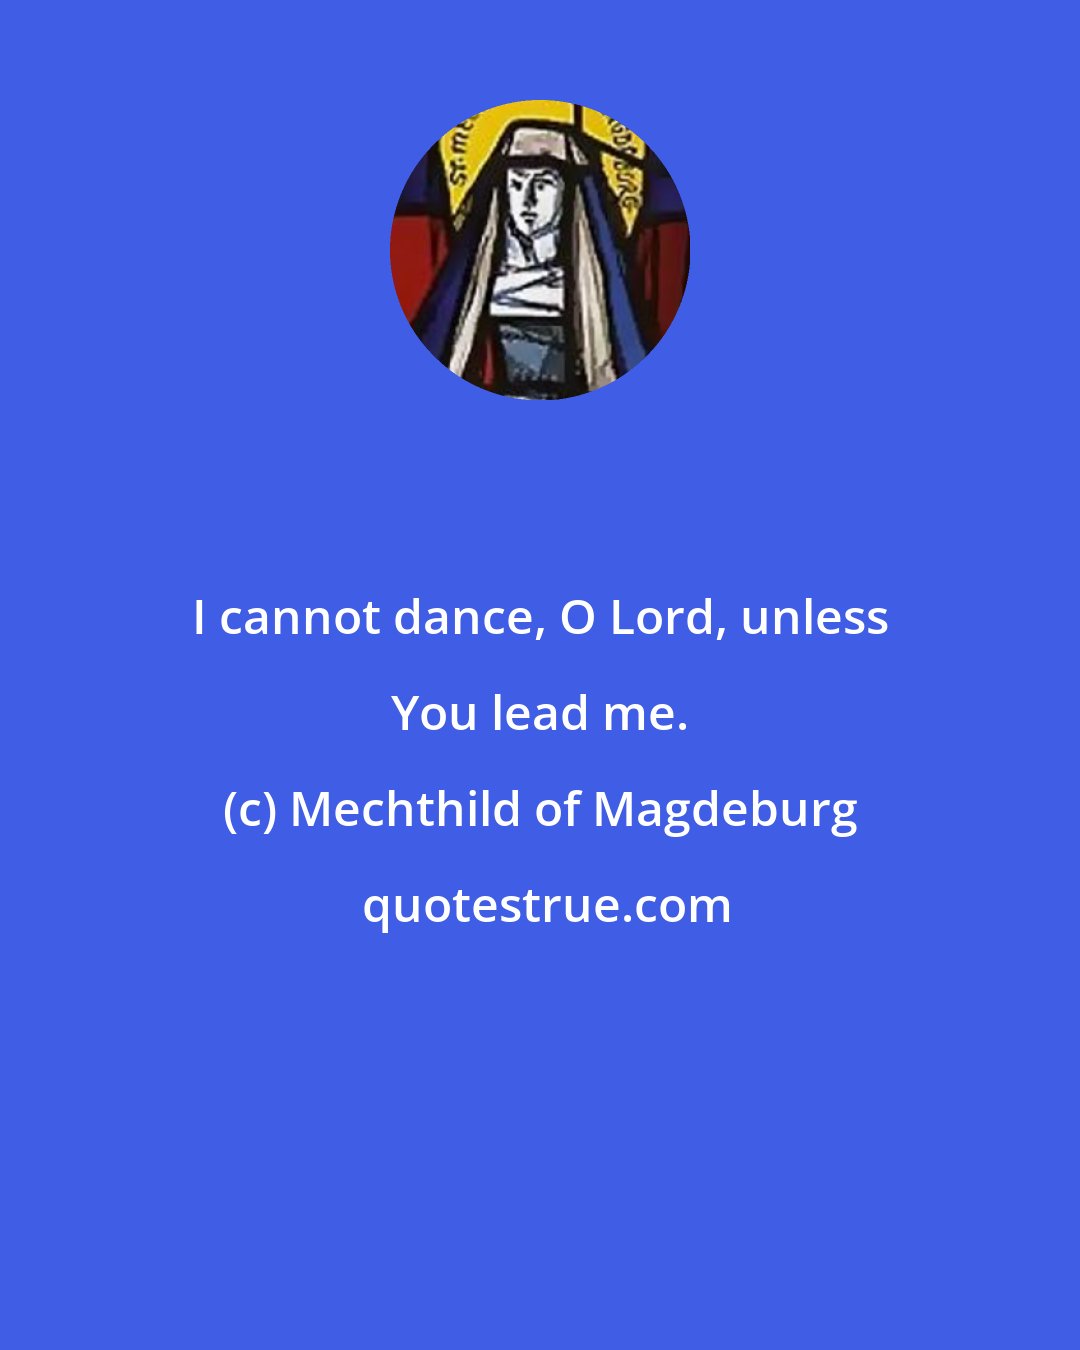 Mechthild of Magdeburg: I cannot dance, O Lord, unless You lead me.